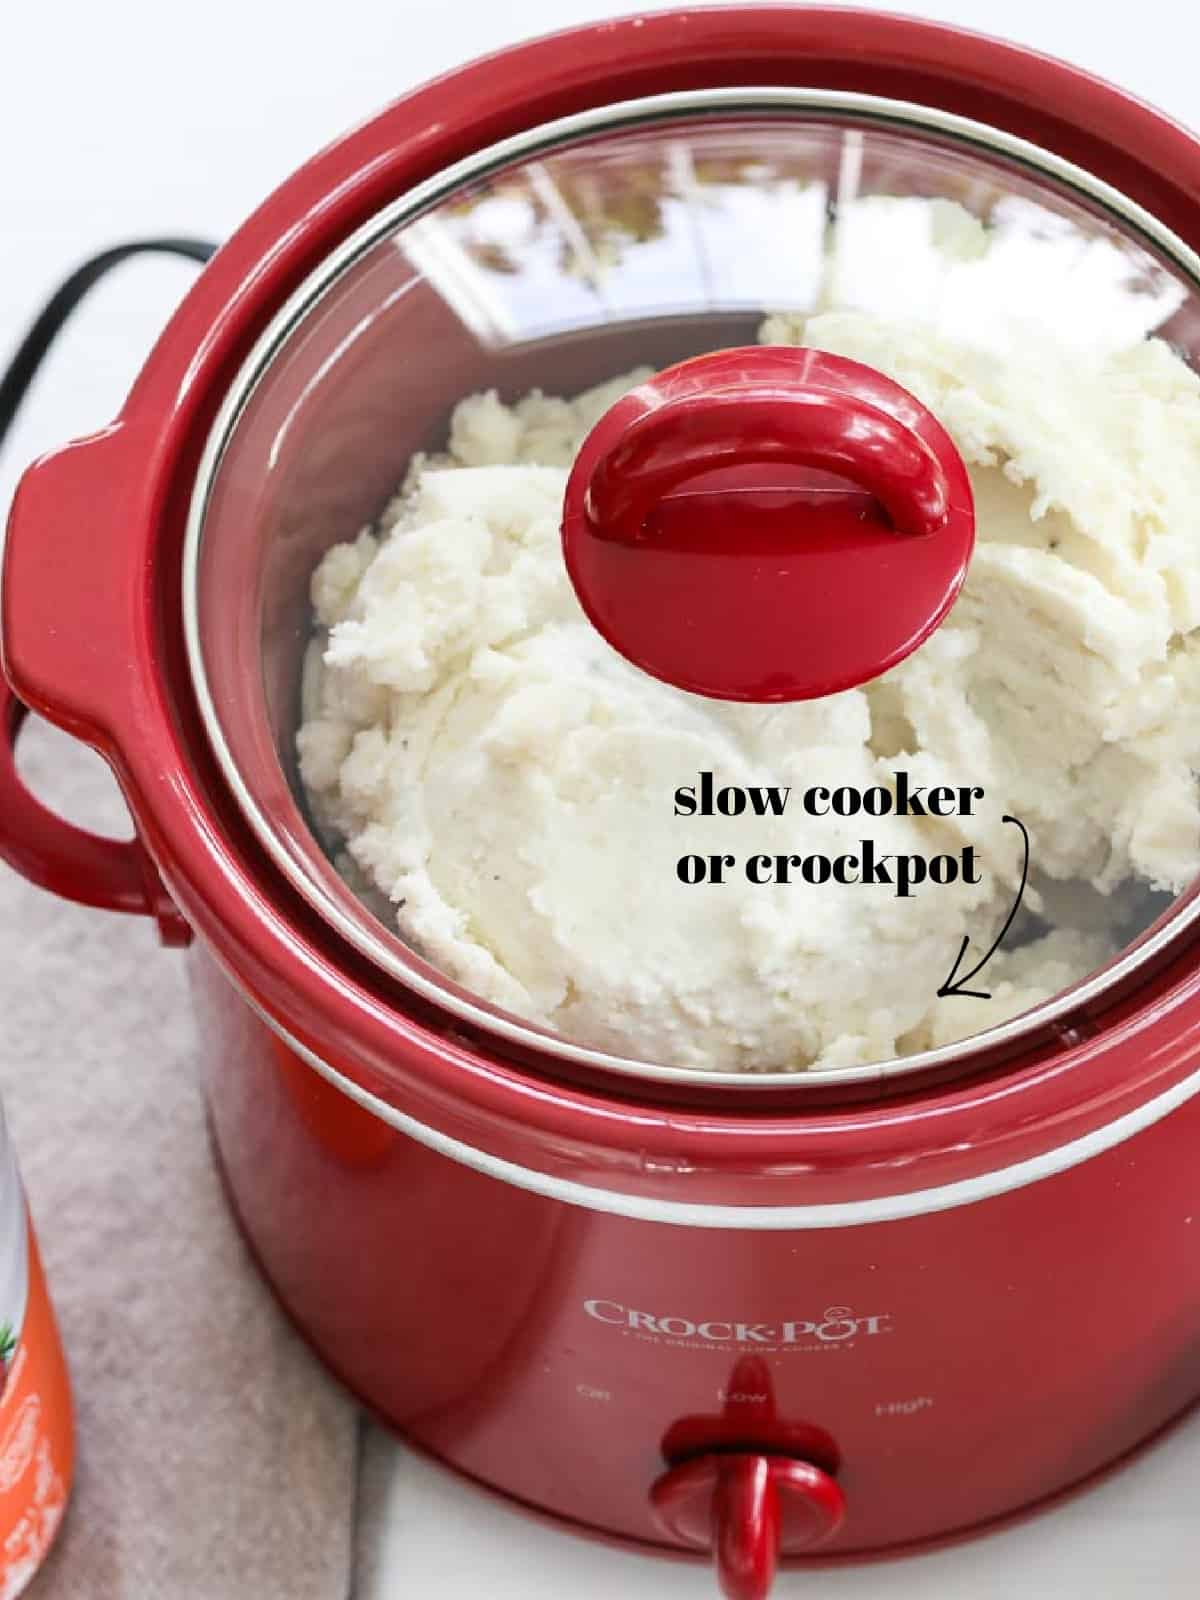 https://www.delicioustable.com/wp-content/uploads/2023/02/How-to-reheat-or-warm-Mashed-Potatoes-process-shot-slow-cooker.jpg